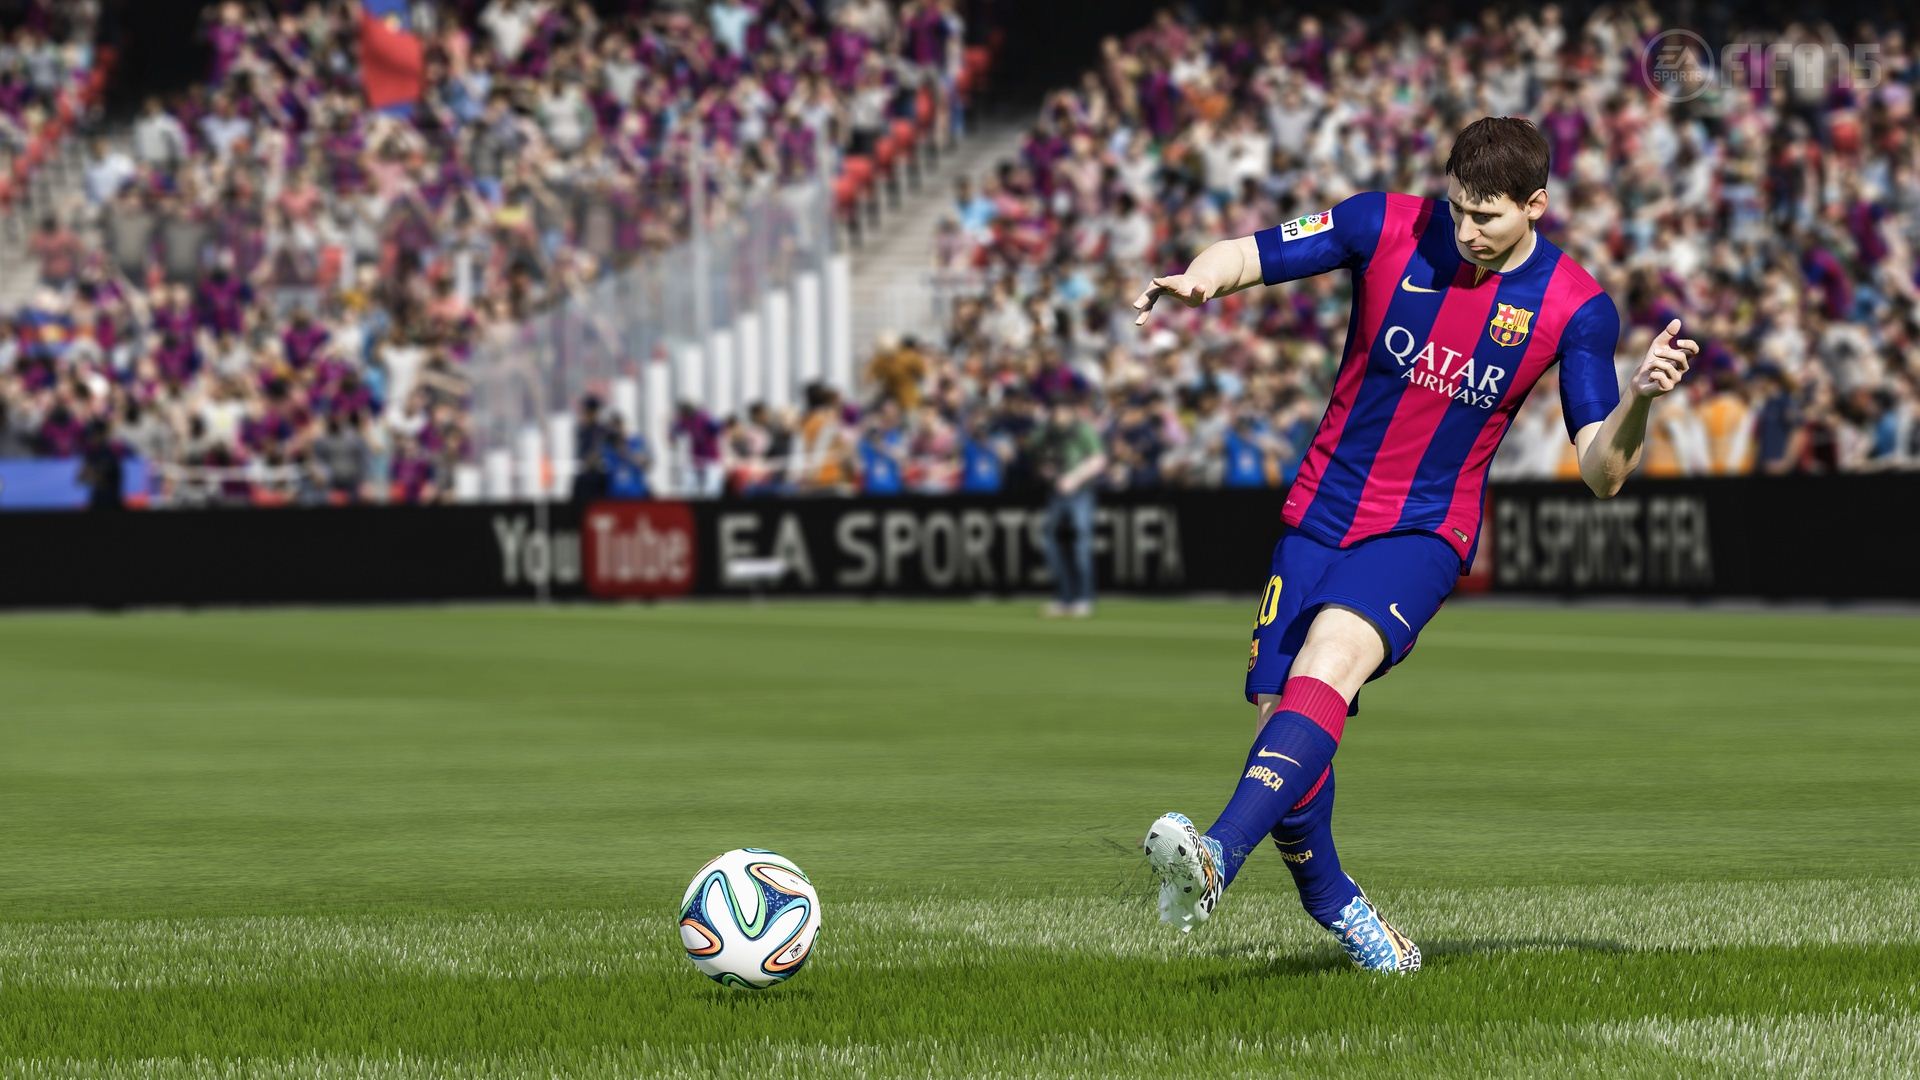 Fifa Gets Brand New Gameplay Video Showing A Full Match And